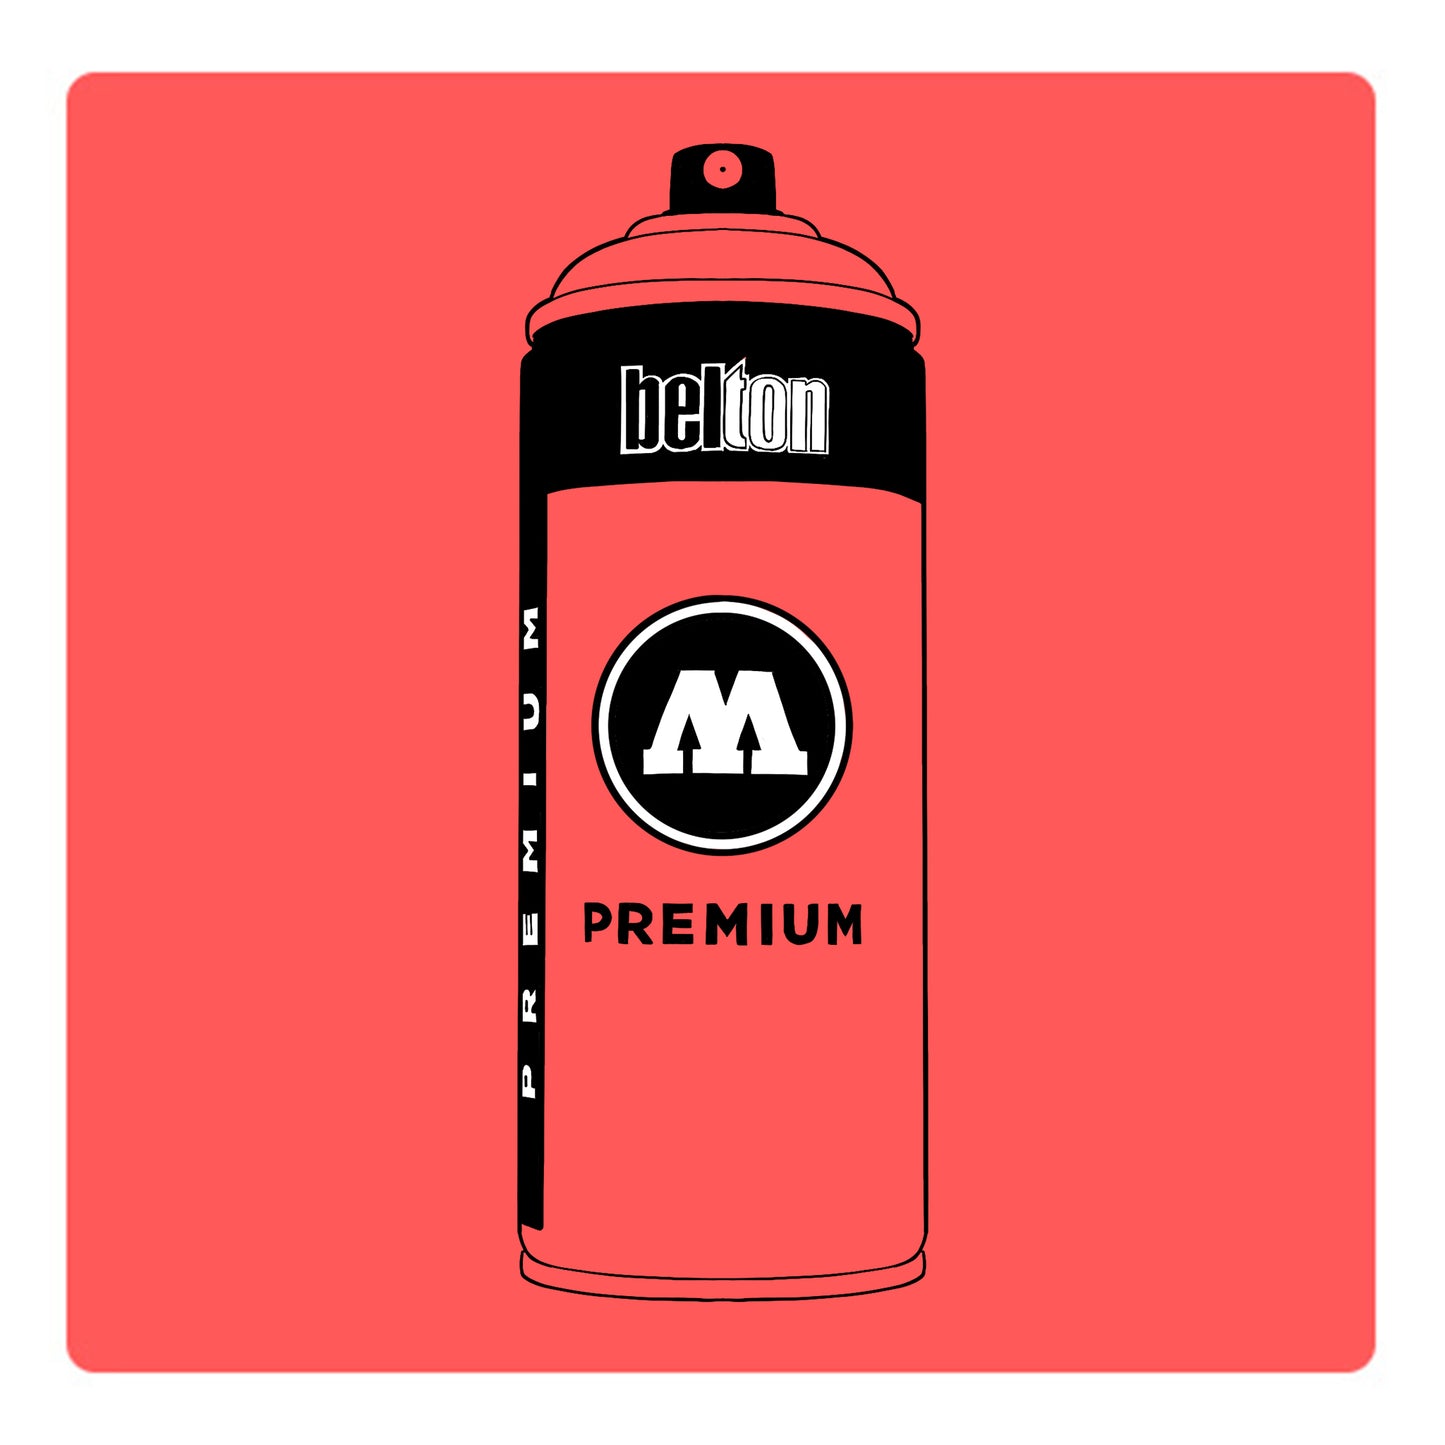 A black outline drawing of a coral  spray paint can with the words "belton","premium" and the letter"M" written on the face in black and white font. The background is a color swatch of the same coral with a white border